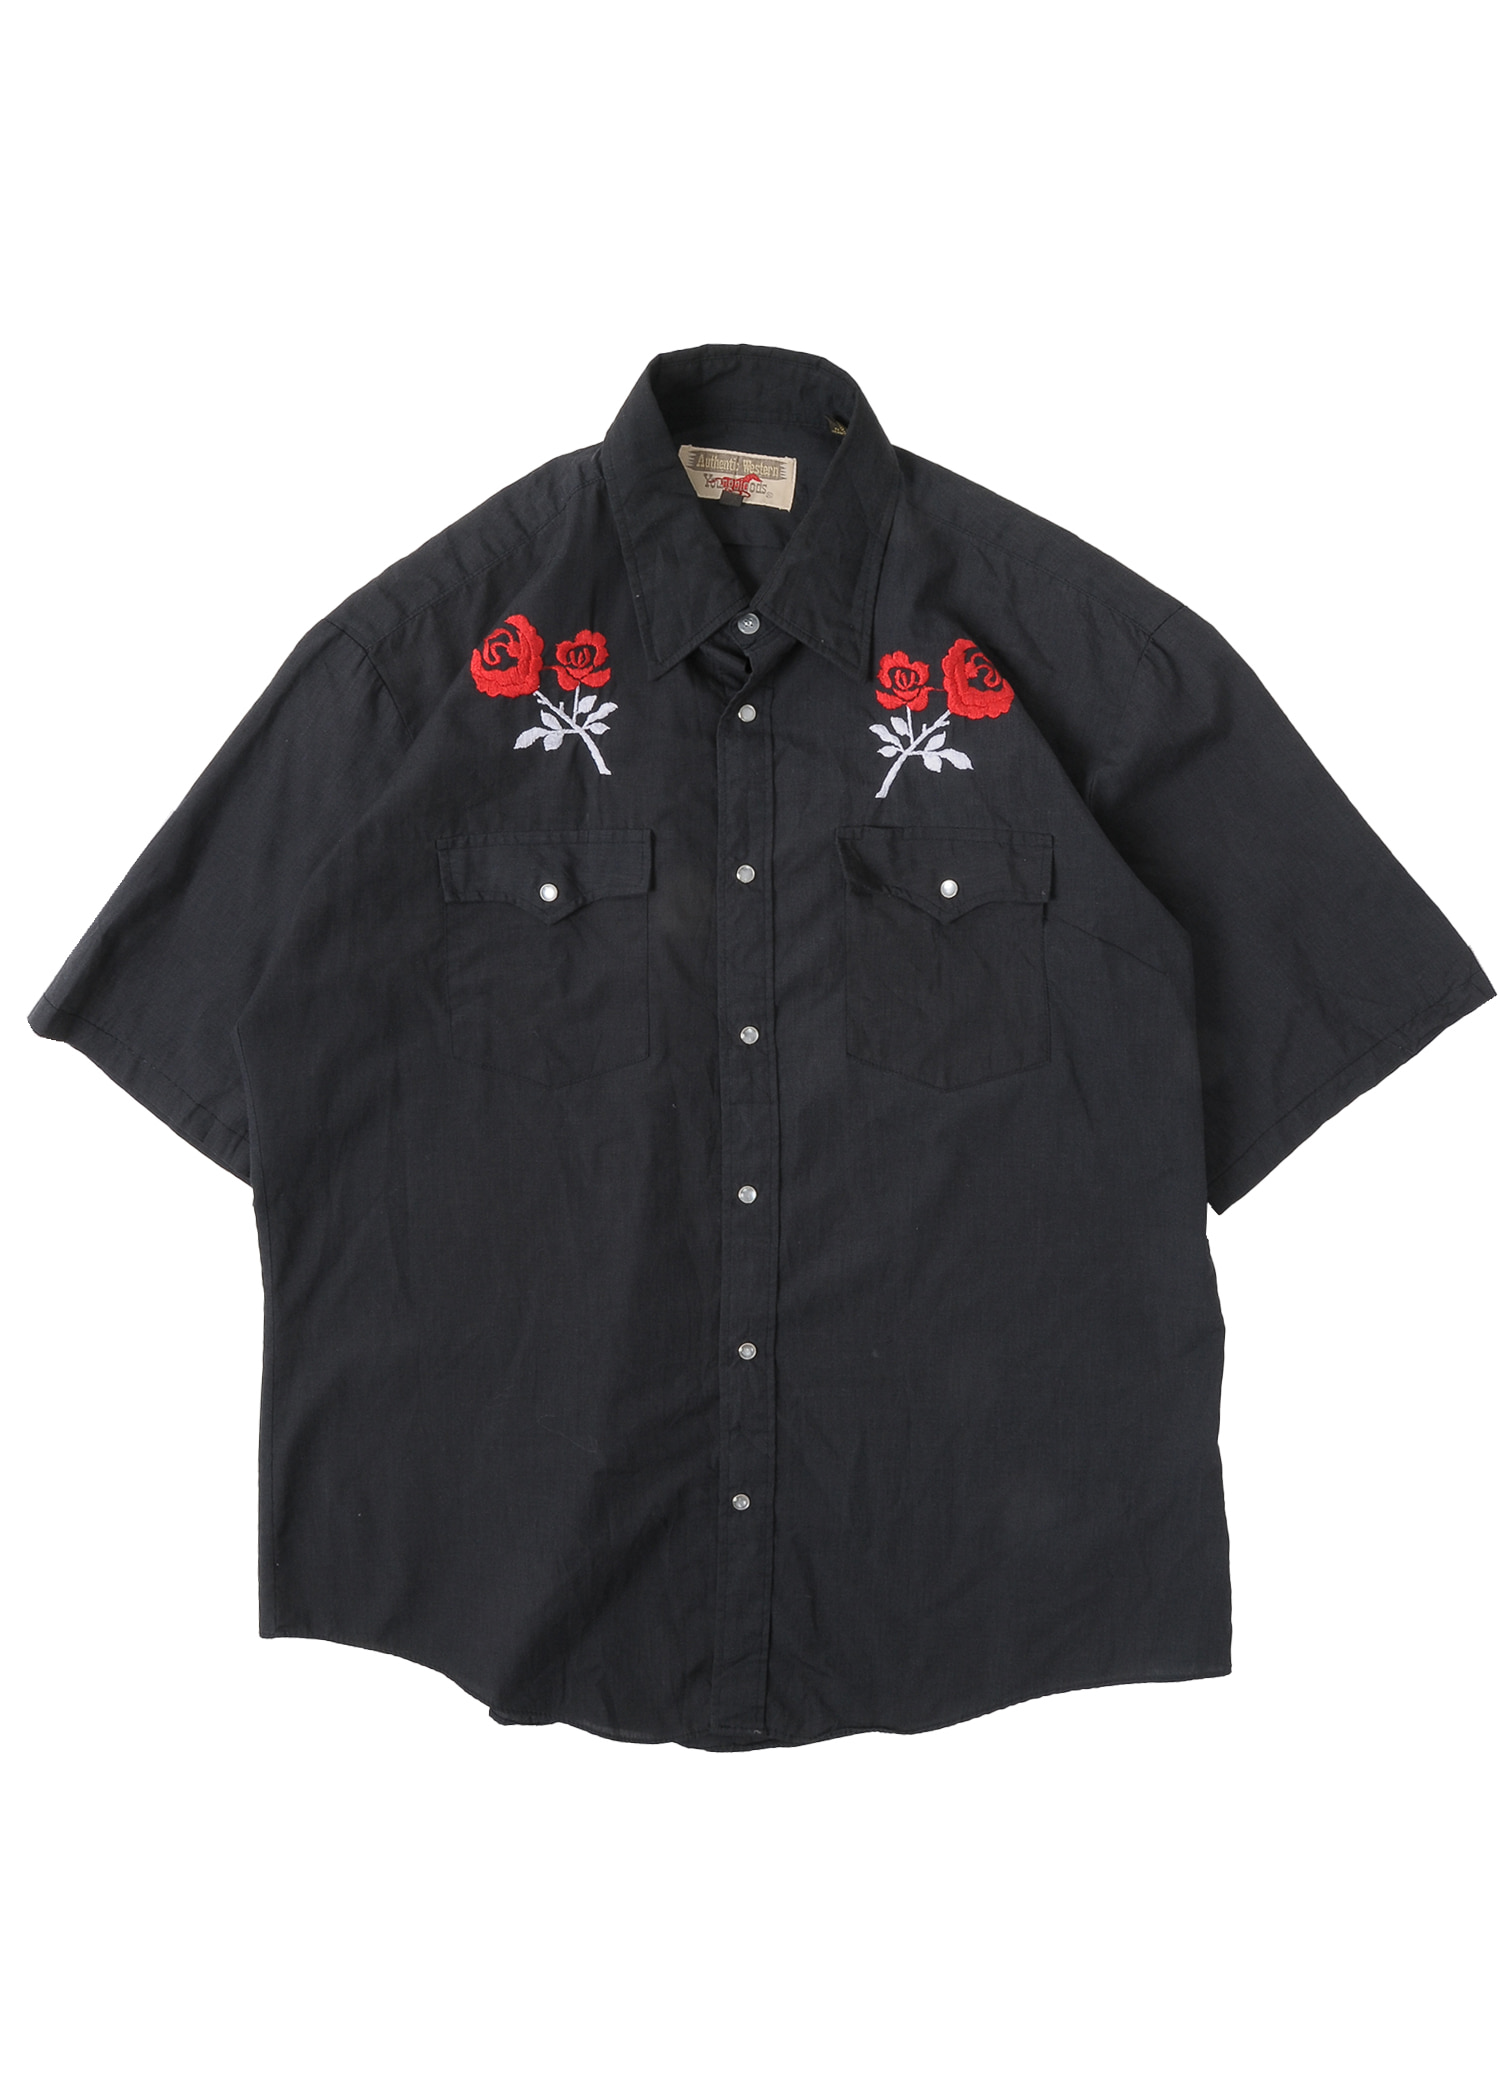 Youngblood western shirts